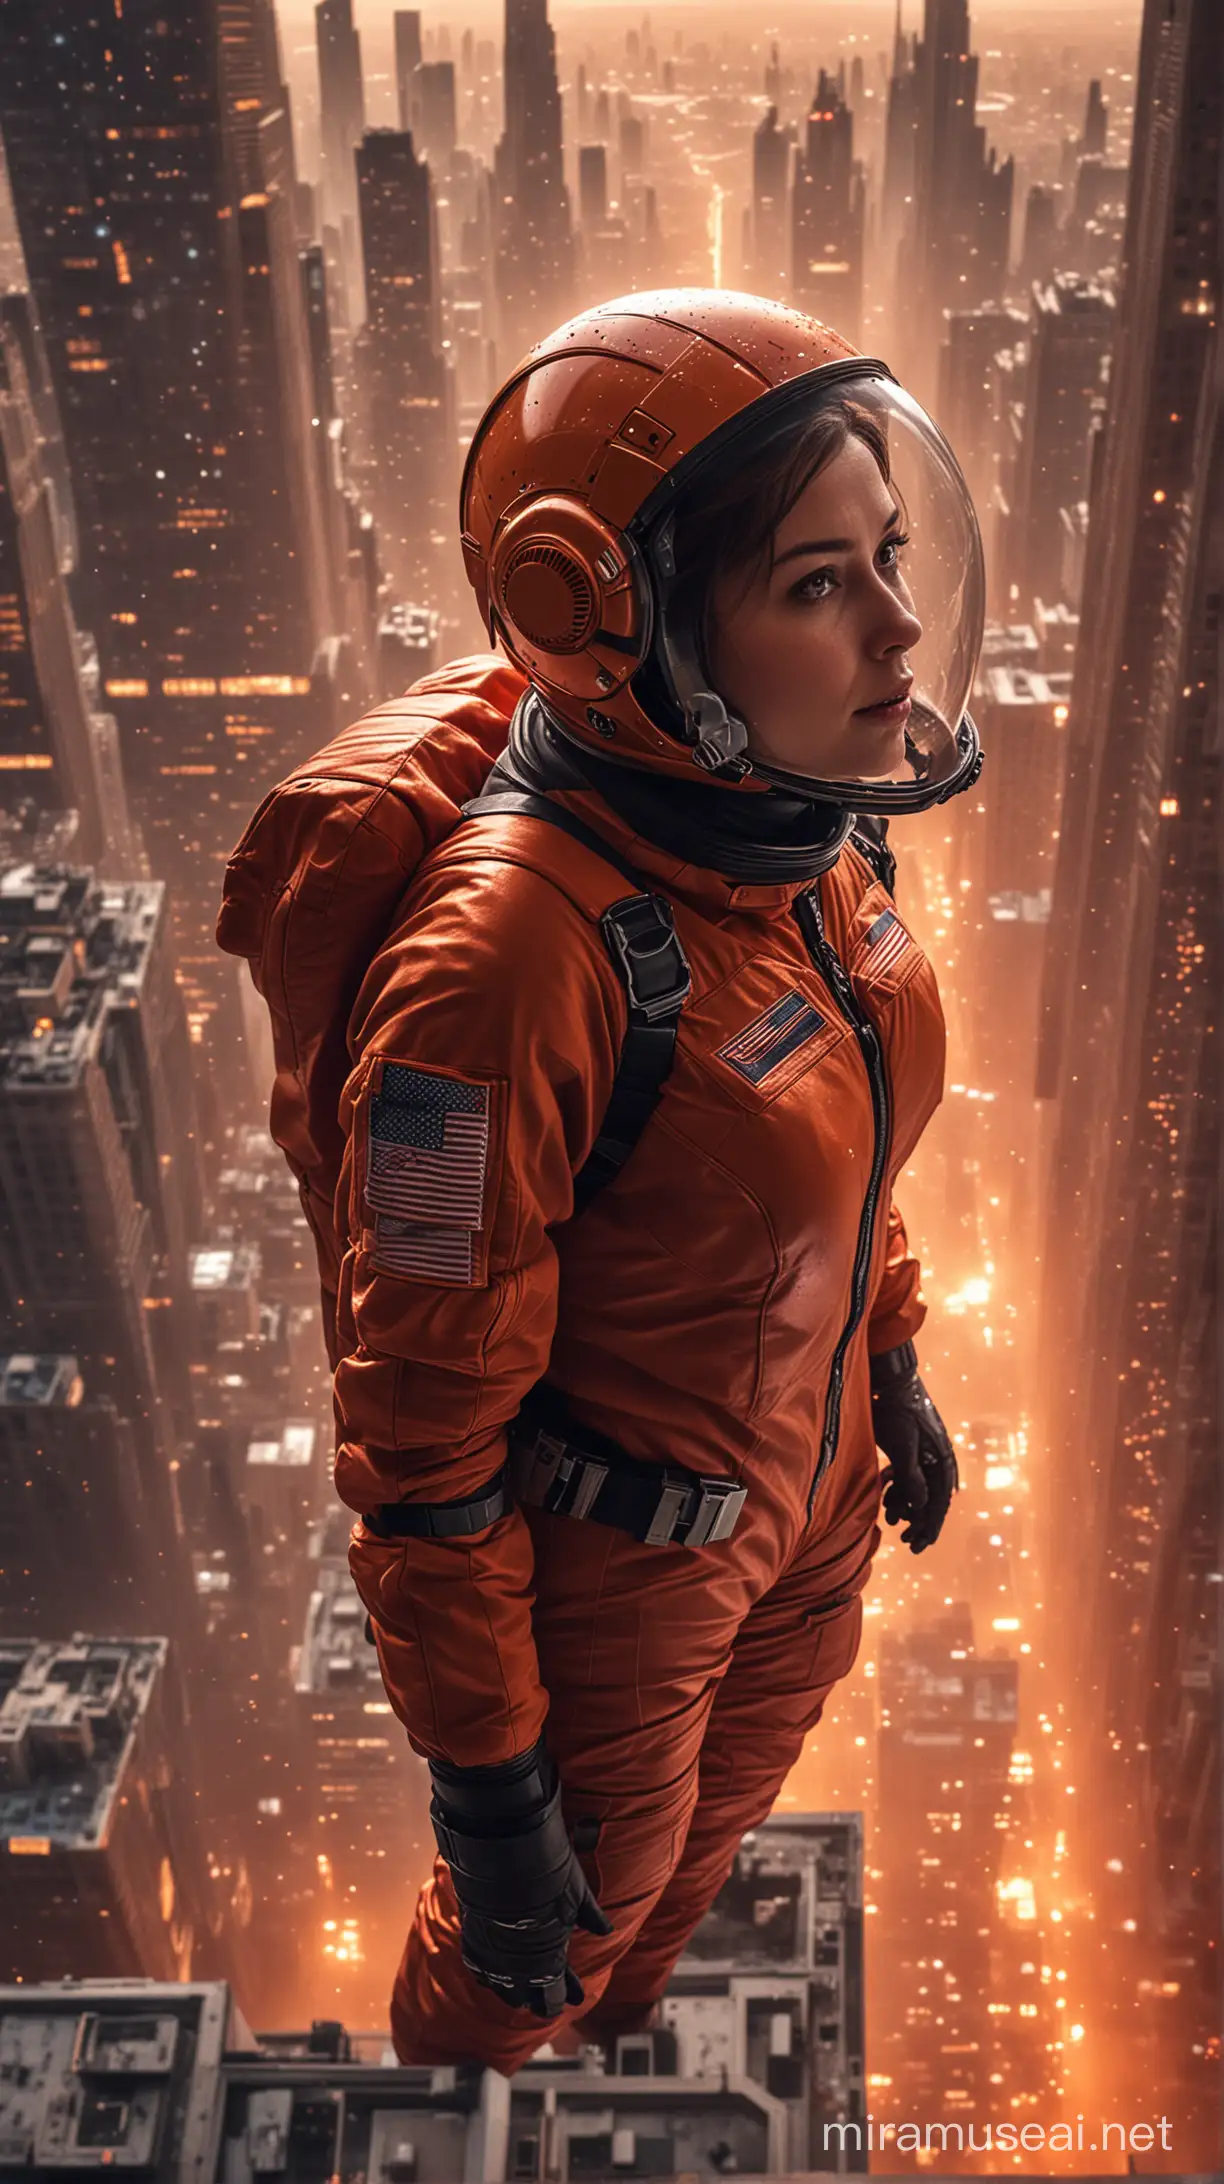 Top angle,view from top,ultra close up,a woman wearing some kind of space helmet and red spare suit,floating in the air over a city's high building,surrounded by orange light particles over a high building backdrop,Photo realistic,dark apocalypses battle field backdrop, cinematic, HDR.